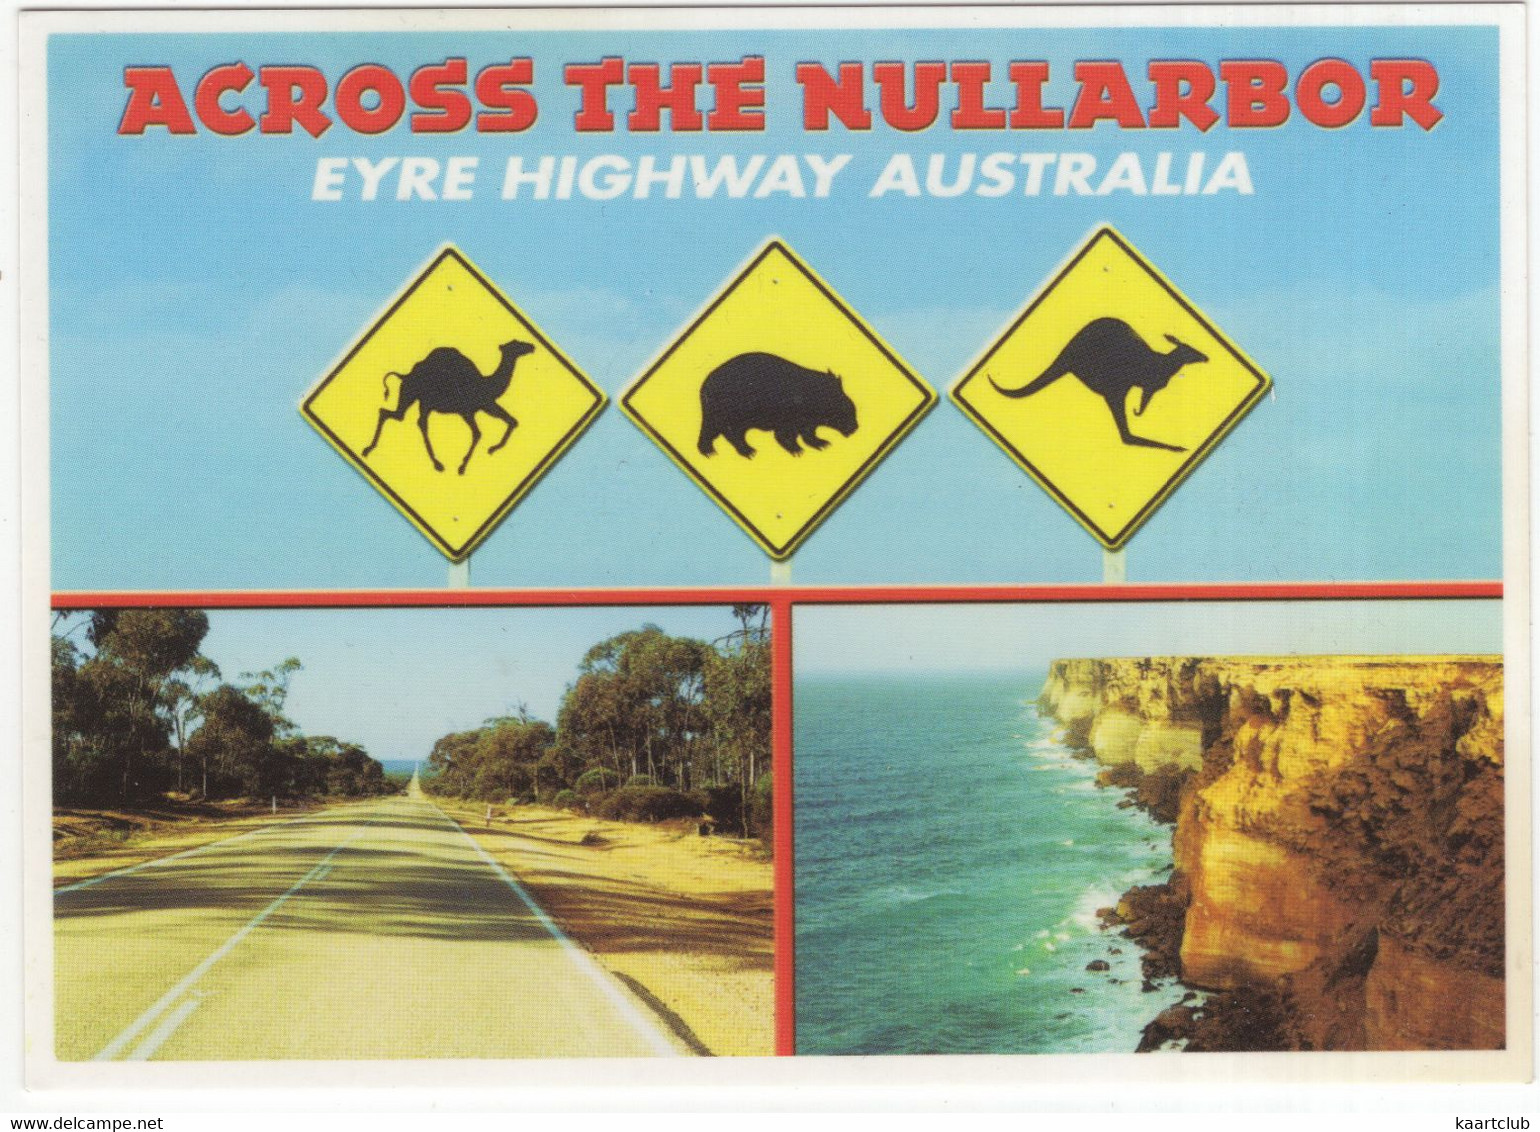 Across The Nullabor - Eyre Highway - Australia - Perth